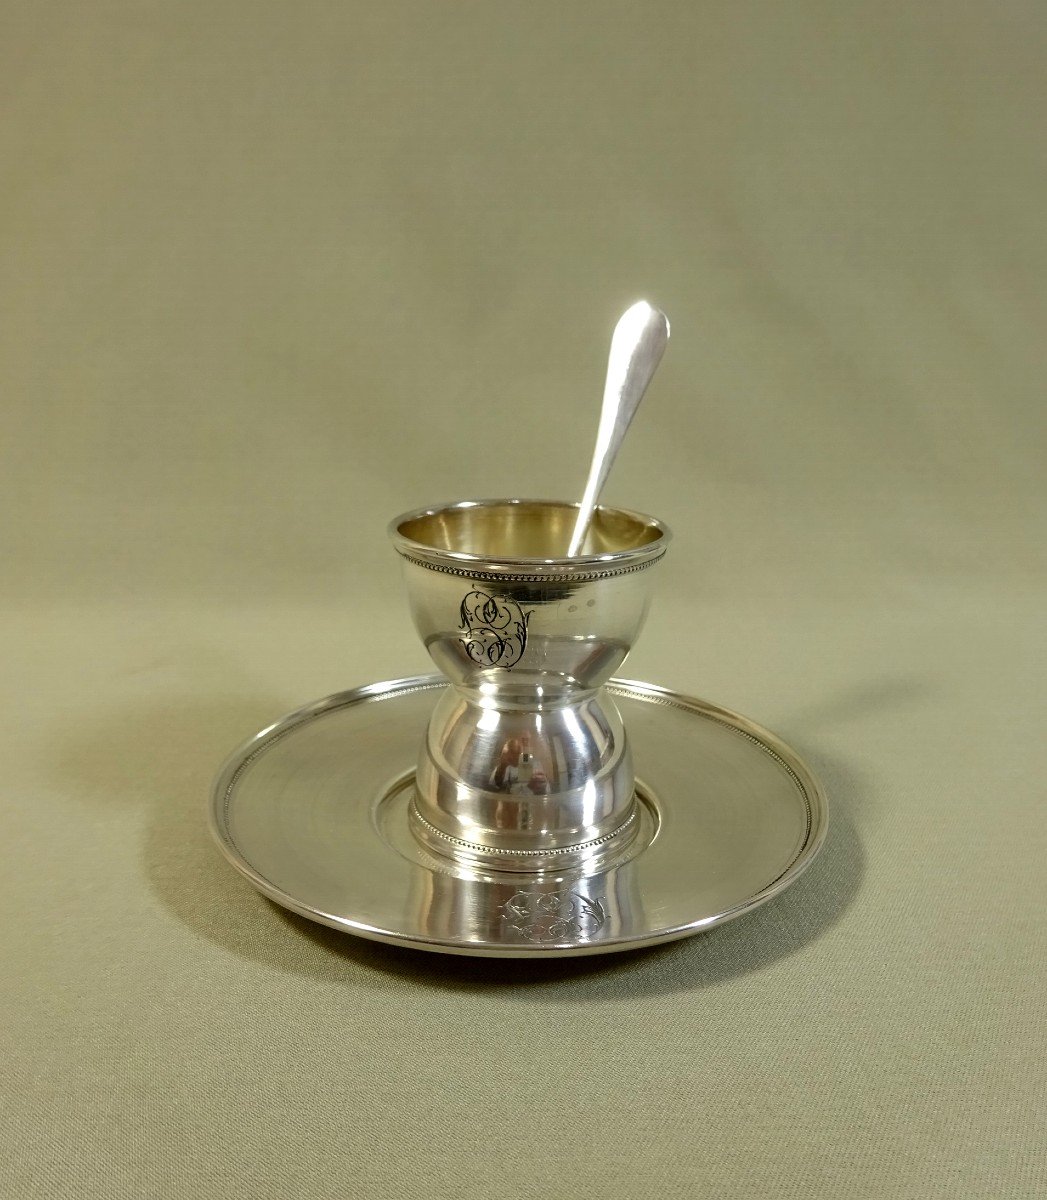 Egg Cup In Silver Minerva, Accompanied By Its Original Stick And Small Spoon.